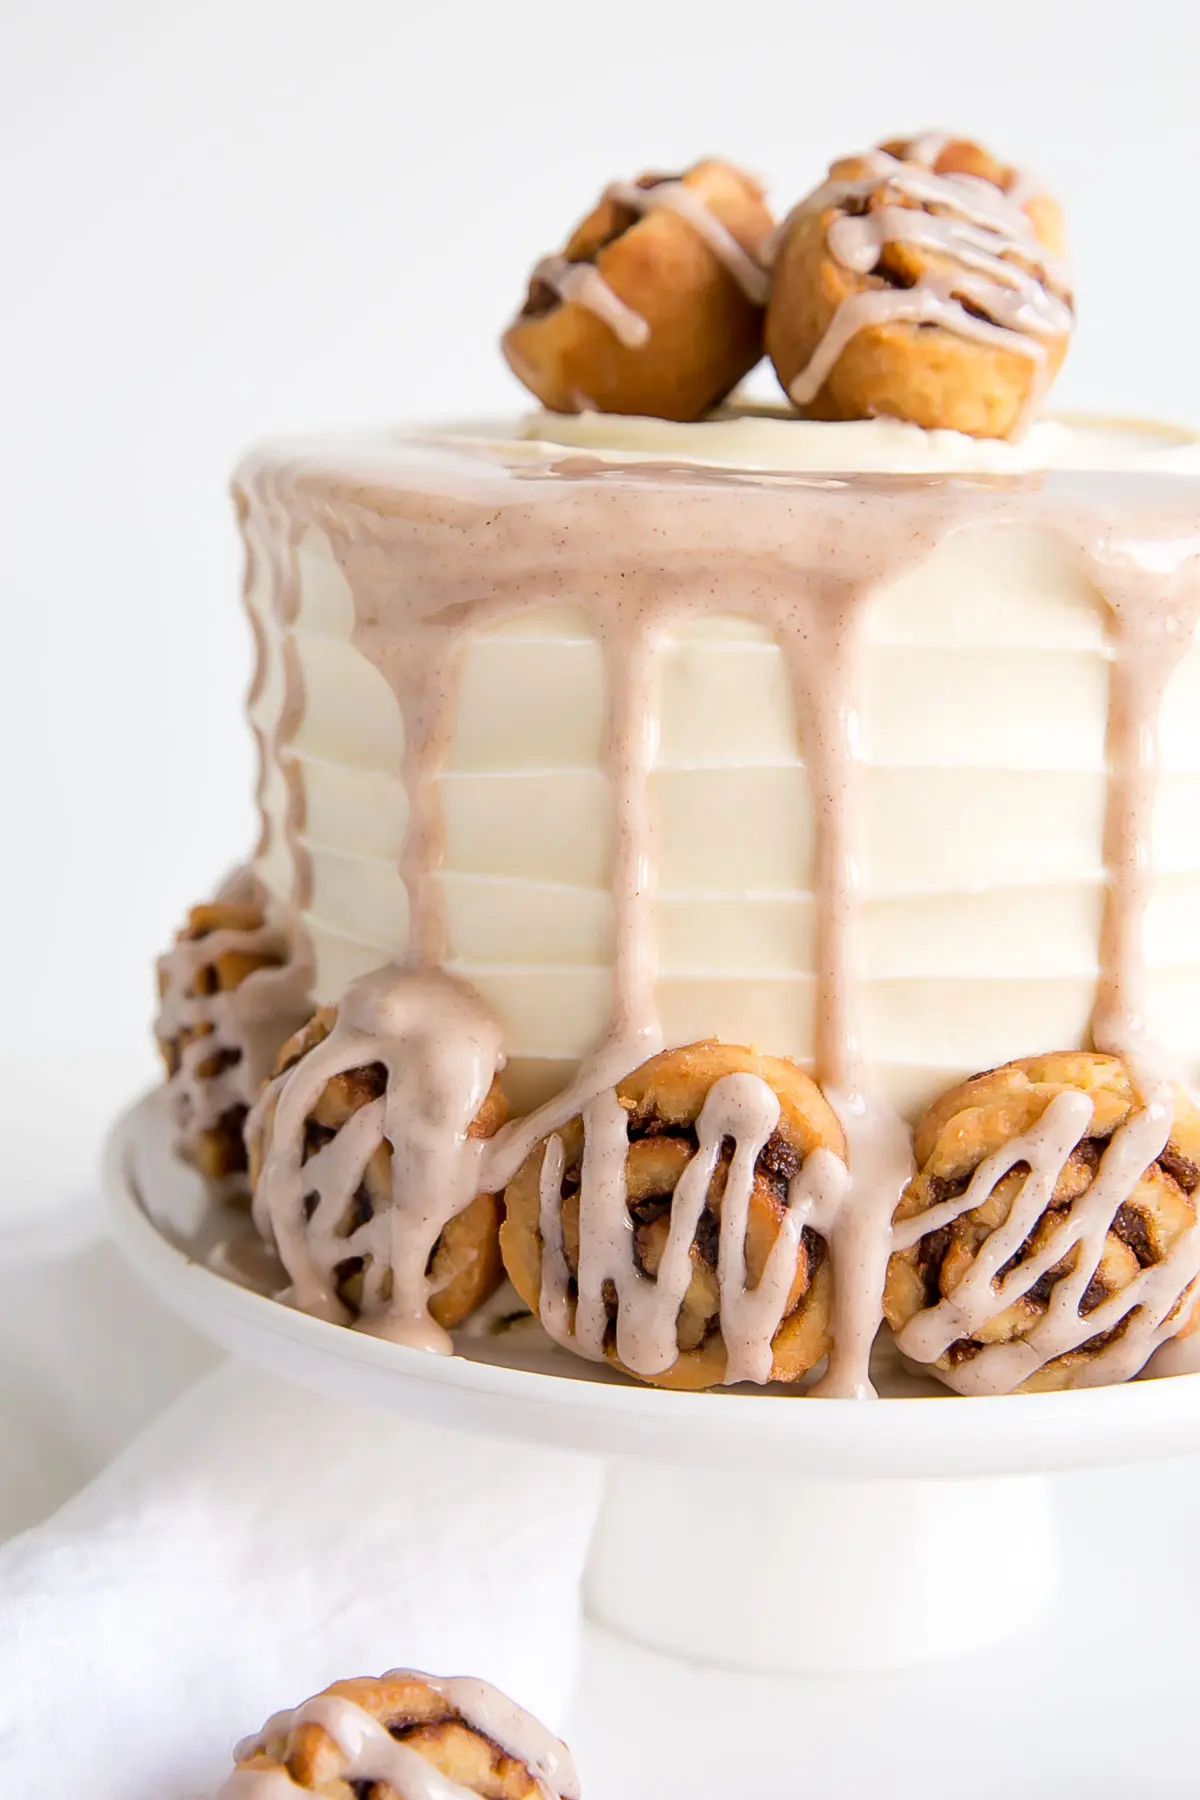 Close up of the size of the cake with mini cinnamon rolls along the bottom.